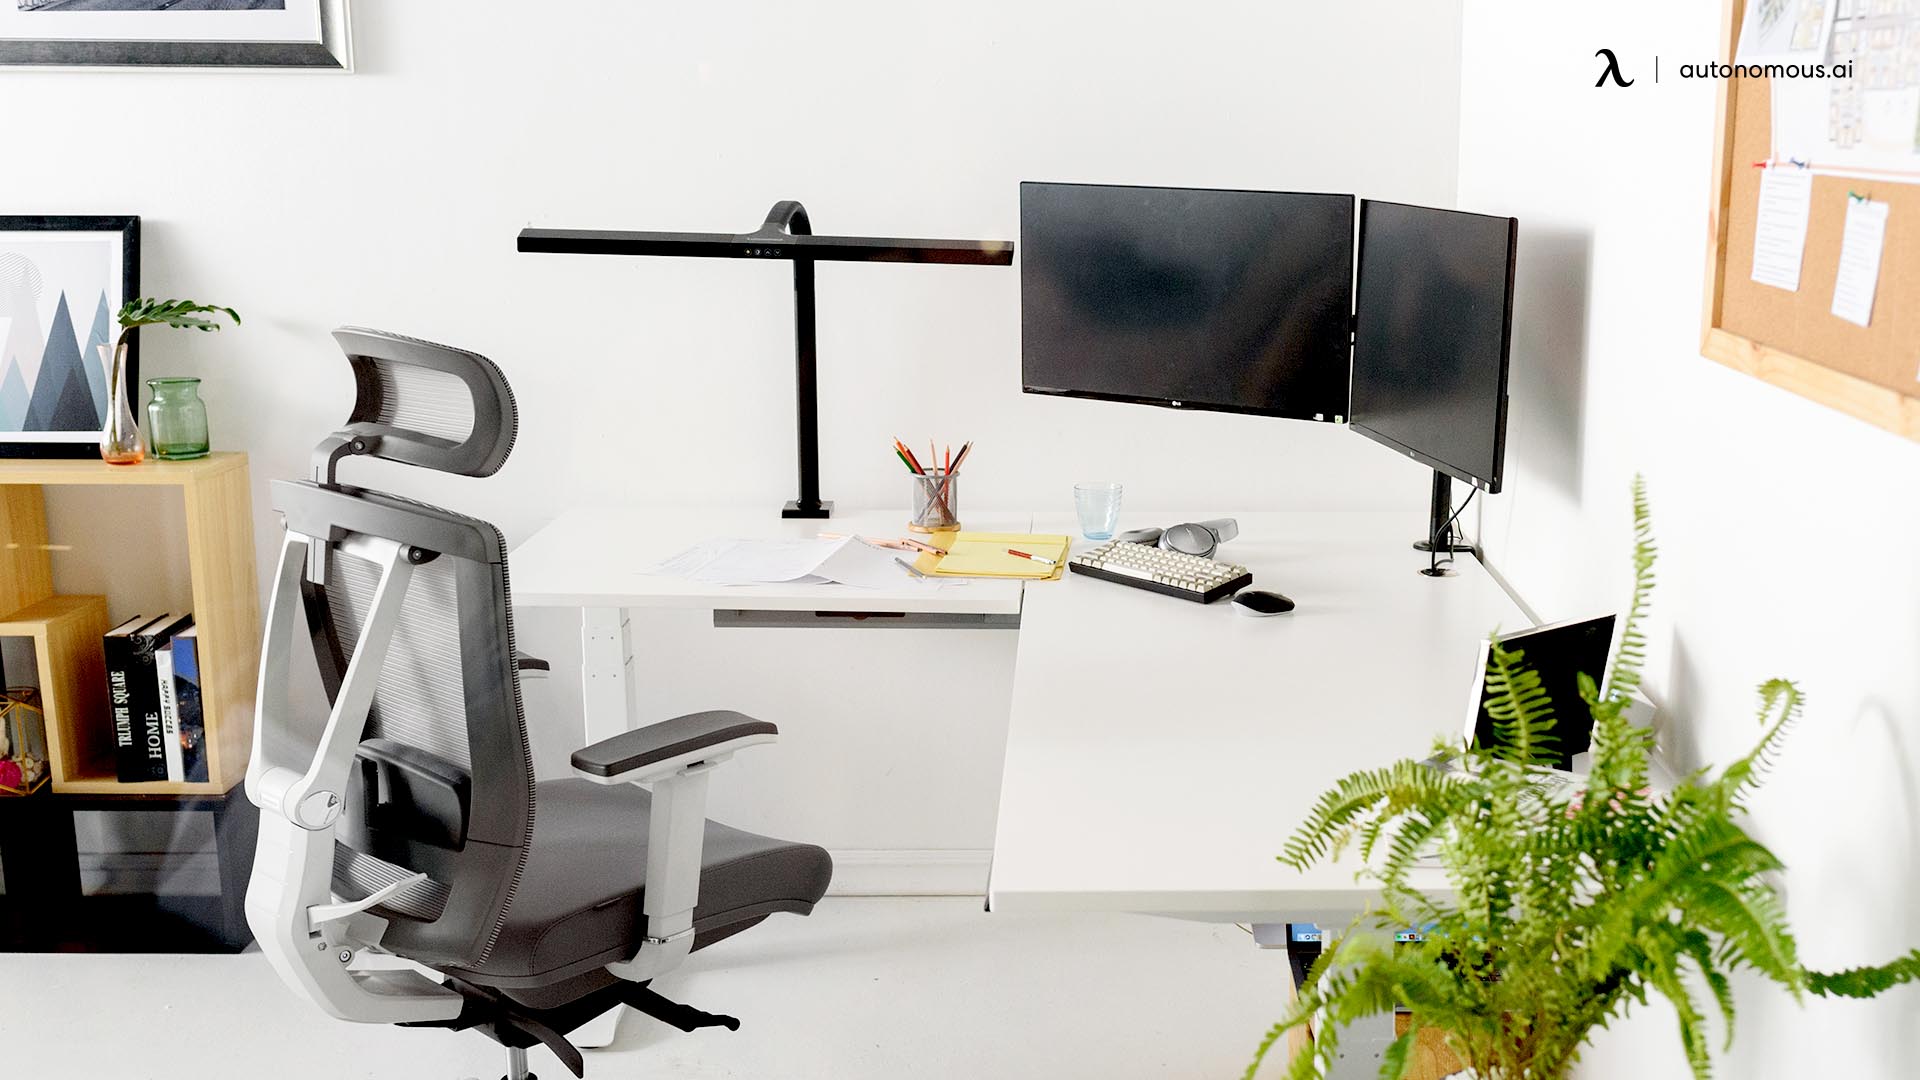 Comfortable chairs in L-shaped desk office layout